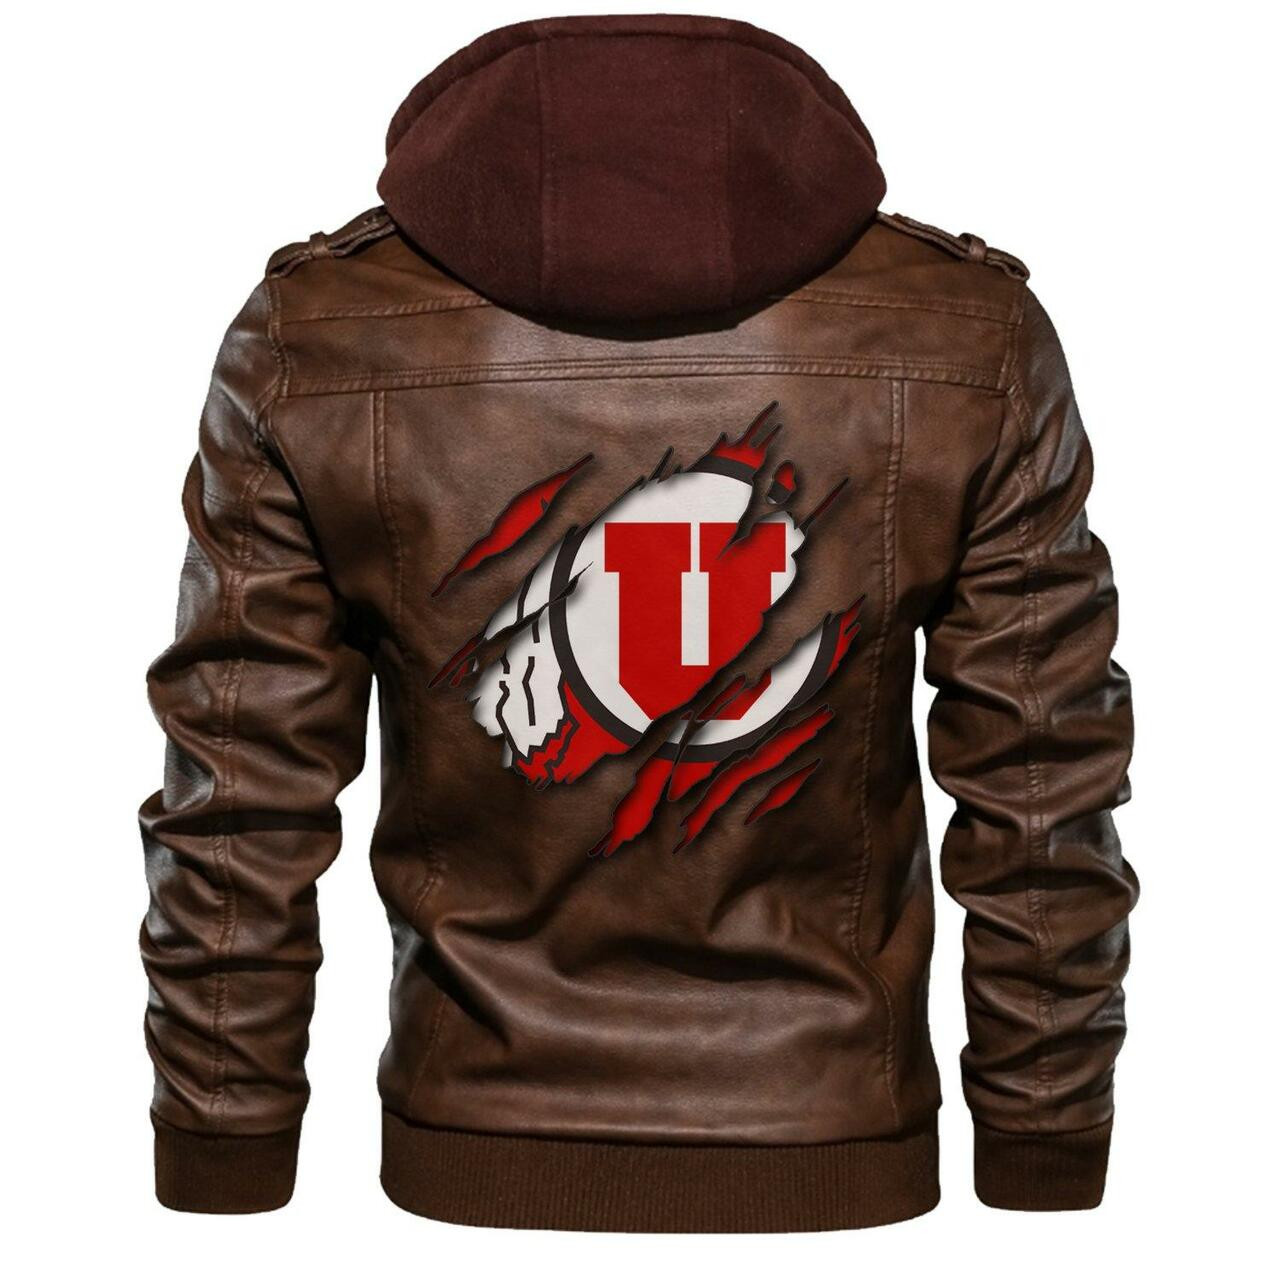 Our store has all of the latest leather jacket 123